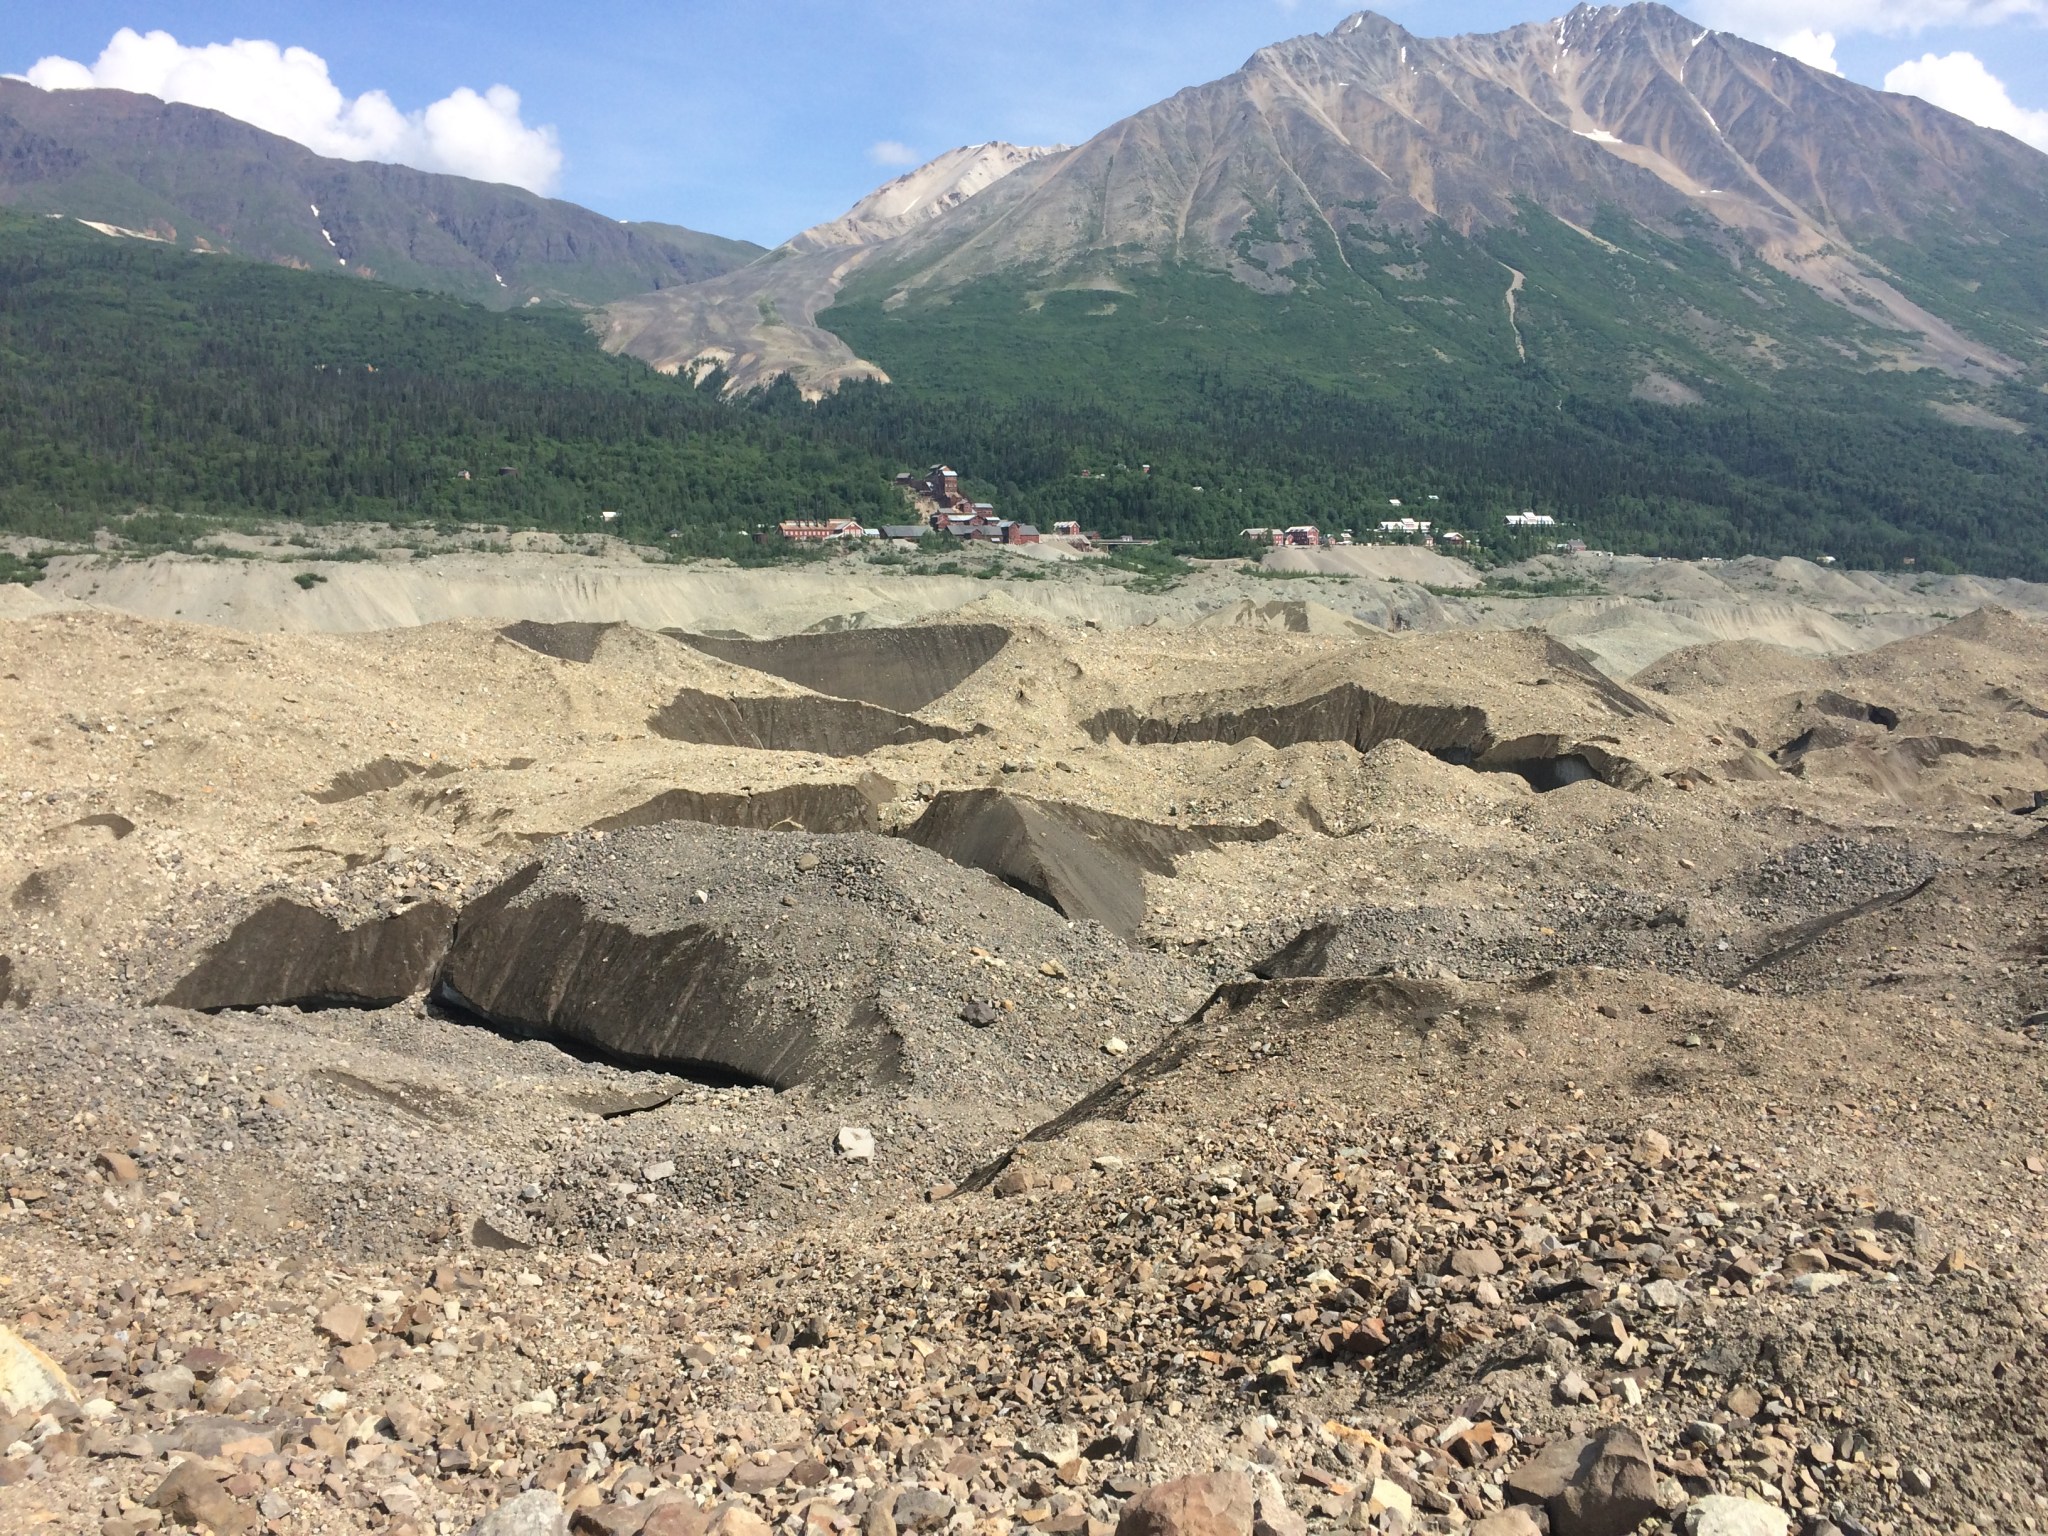 A photo of a glacier in Alaska, covered by tan and gray debris made up of soil, rocks, and ash. The glacier covers most of the foreground of the image - near the viewer, tiny rocks in many shades of brown and tan are visible. Further away, it looks more like sand, piled in peaks and piles with darker gray rocks showing through the soil. In the distance, the soil fades into dark green forests that spread up the sides of two tall gray-brown mountains. A small town made of red brick buildings is nestled between the two mountains. The sky is bright blue with fluffy white clouds.